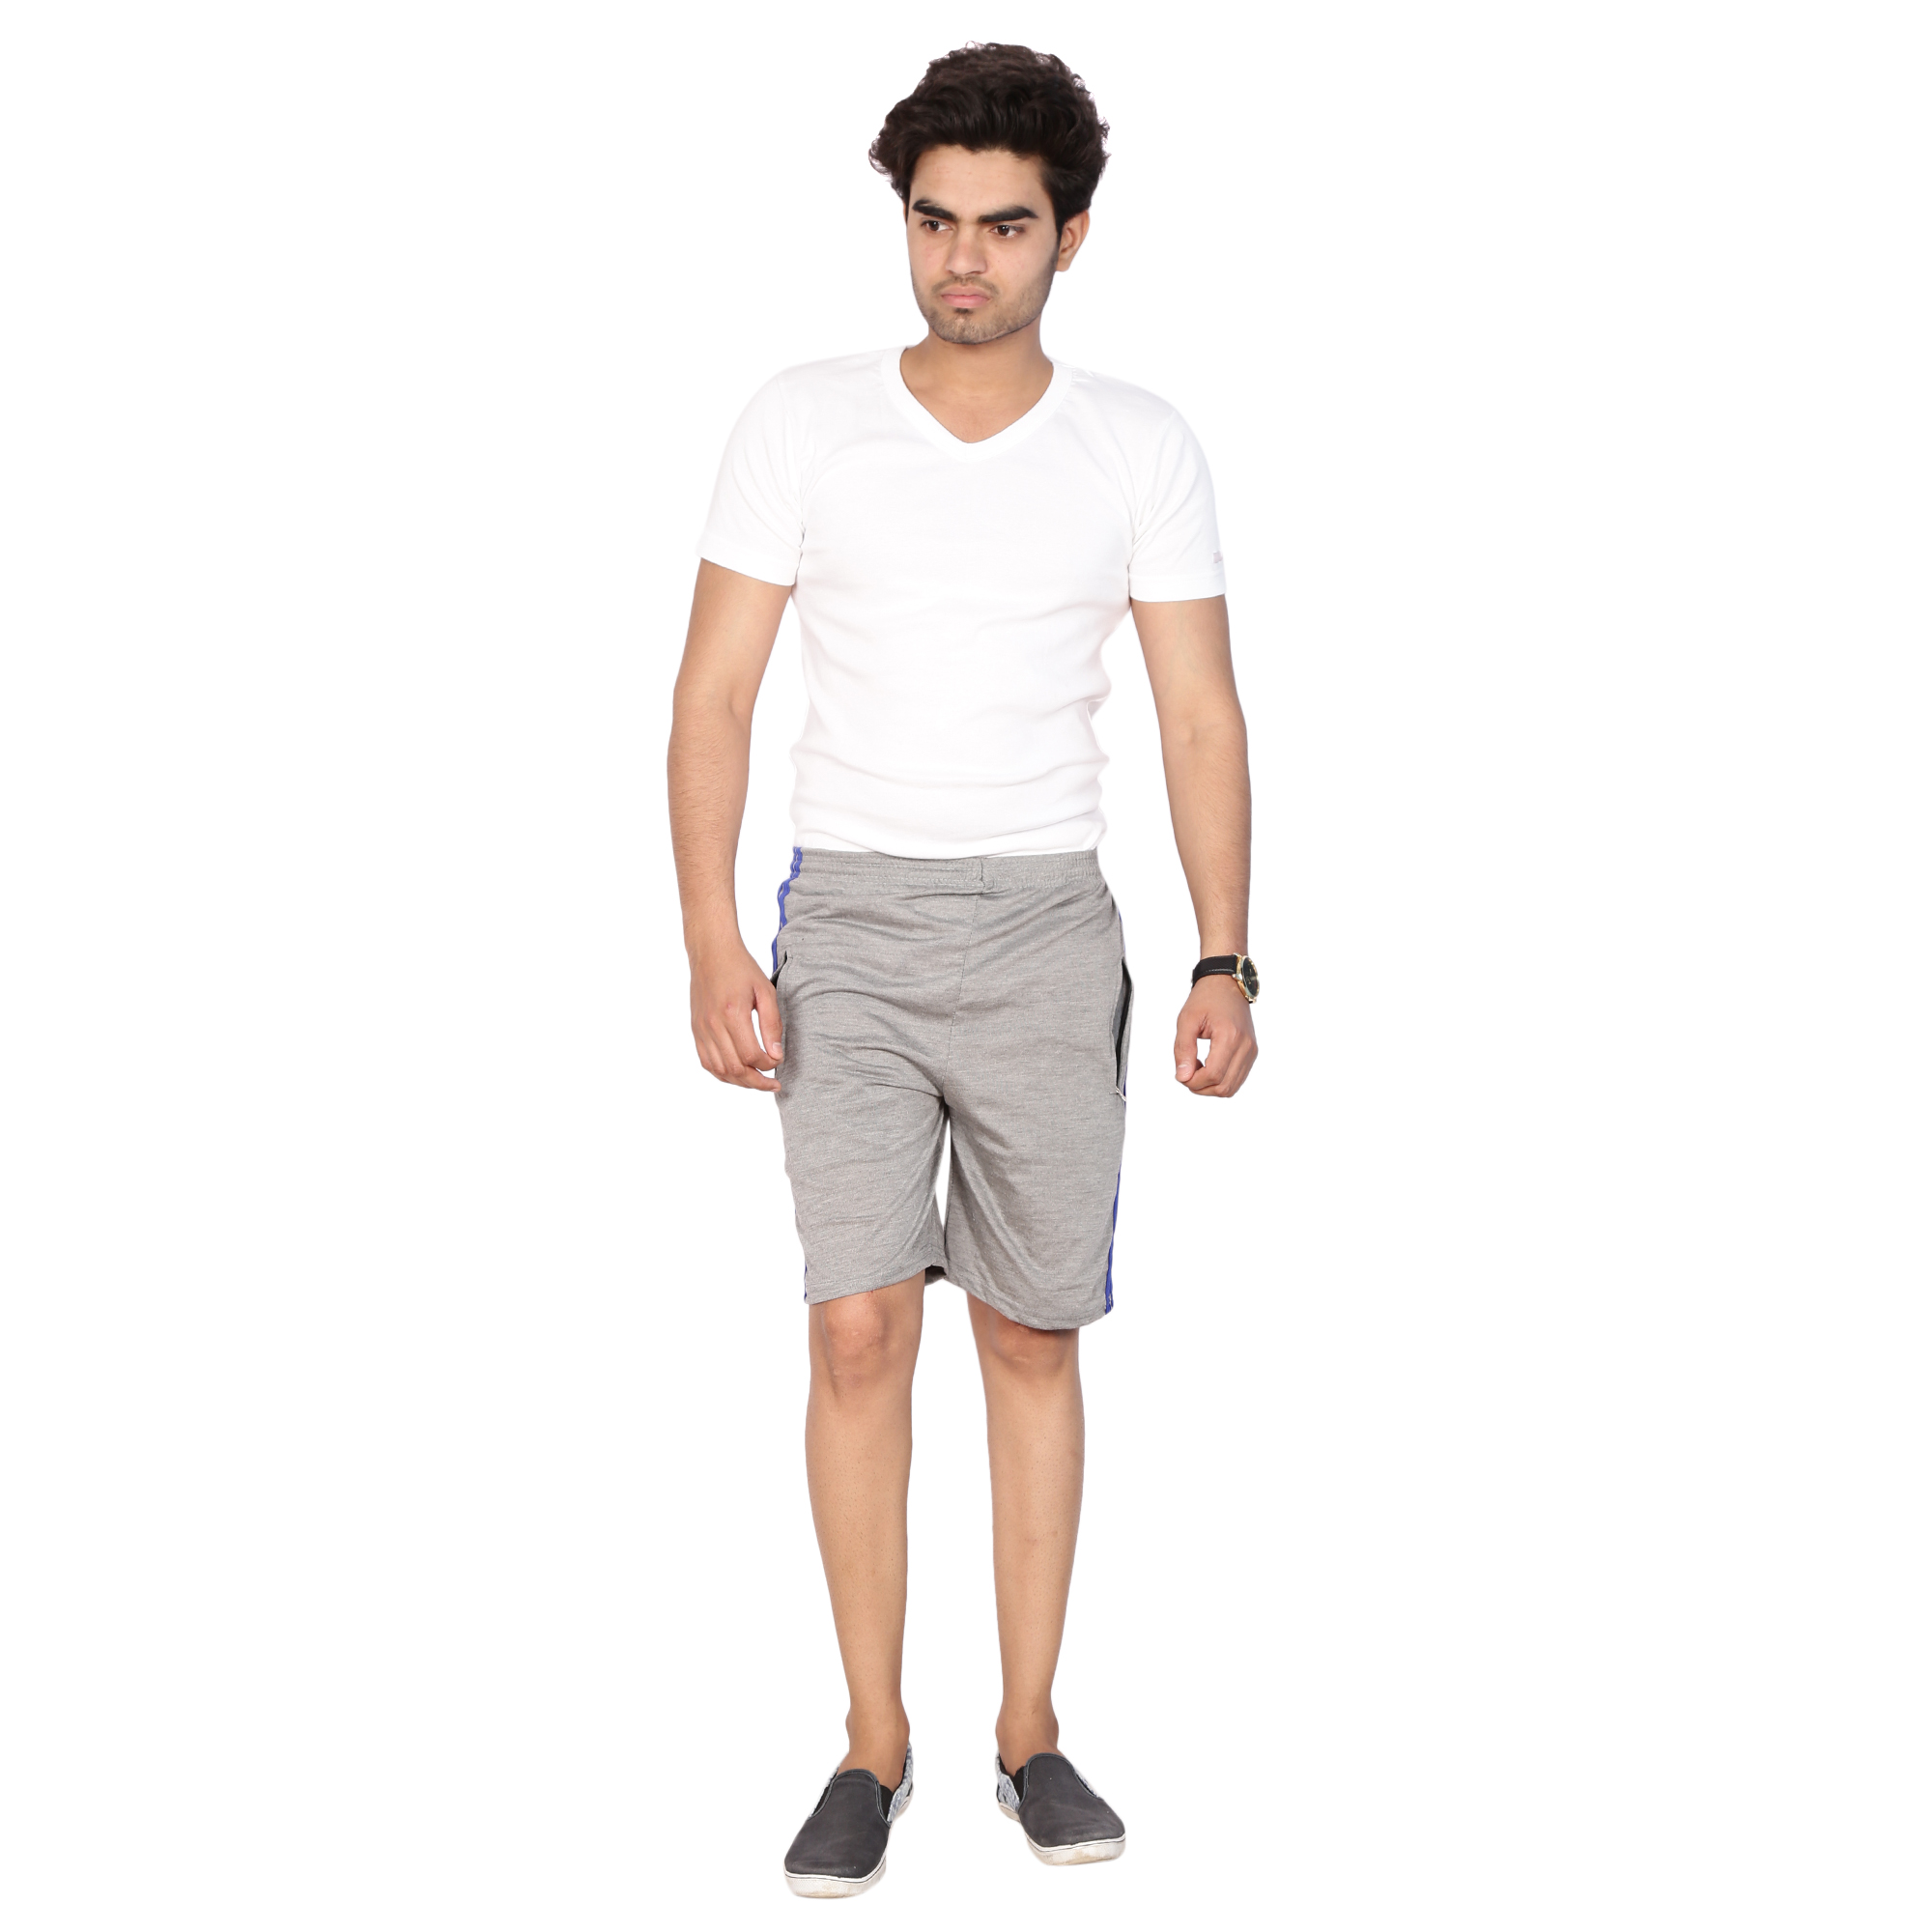 Buy Swaggy Grey Hosiery Shorts for Men Online @ ₹499 from ShopClues